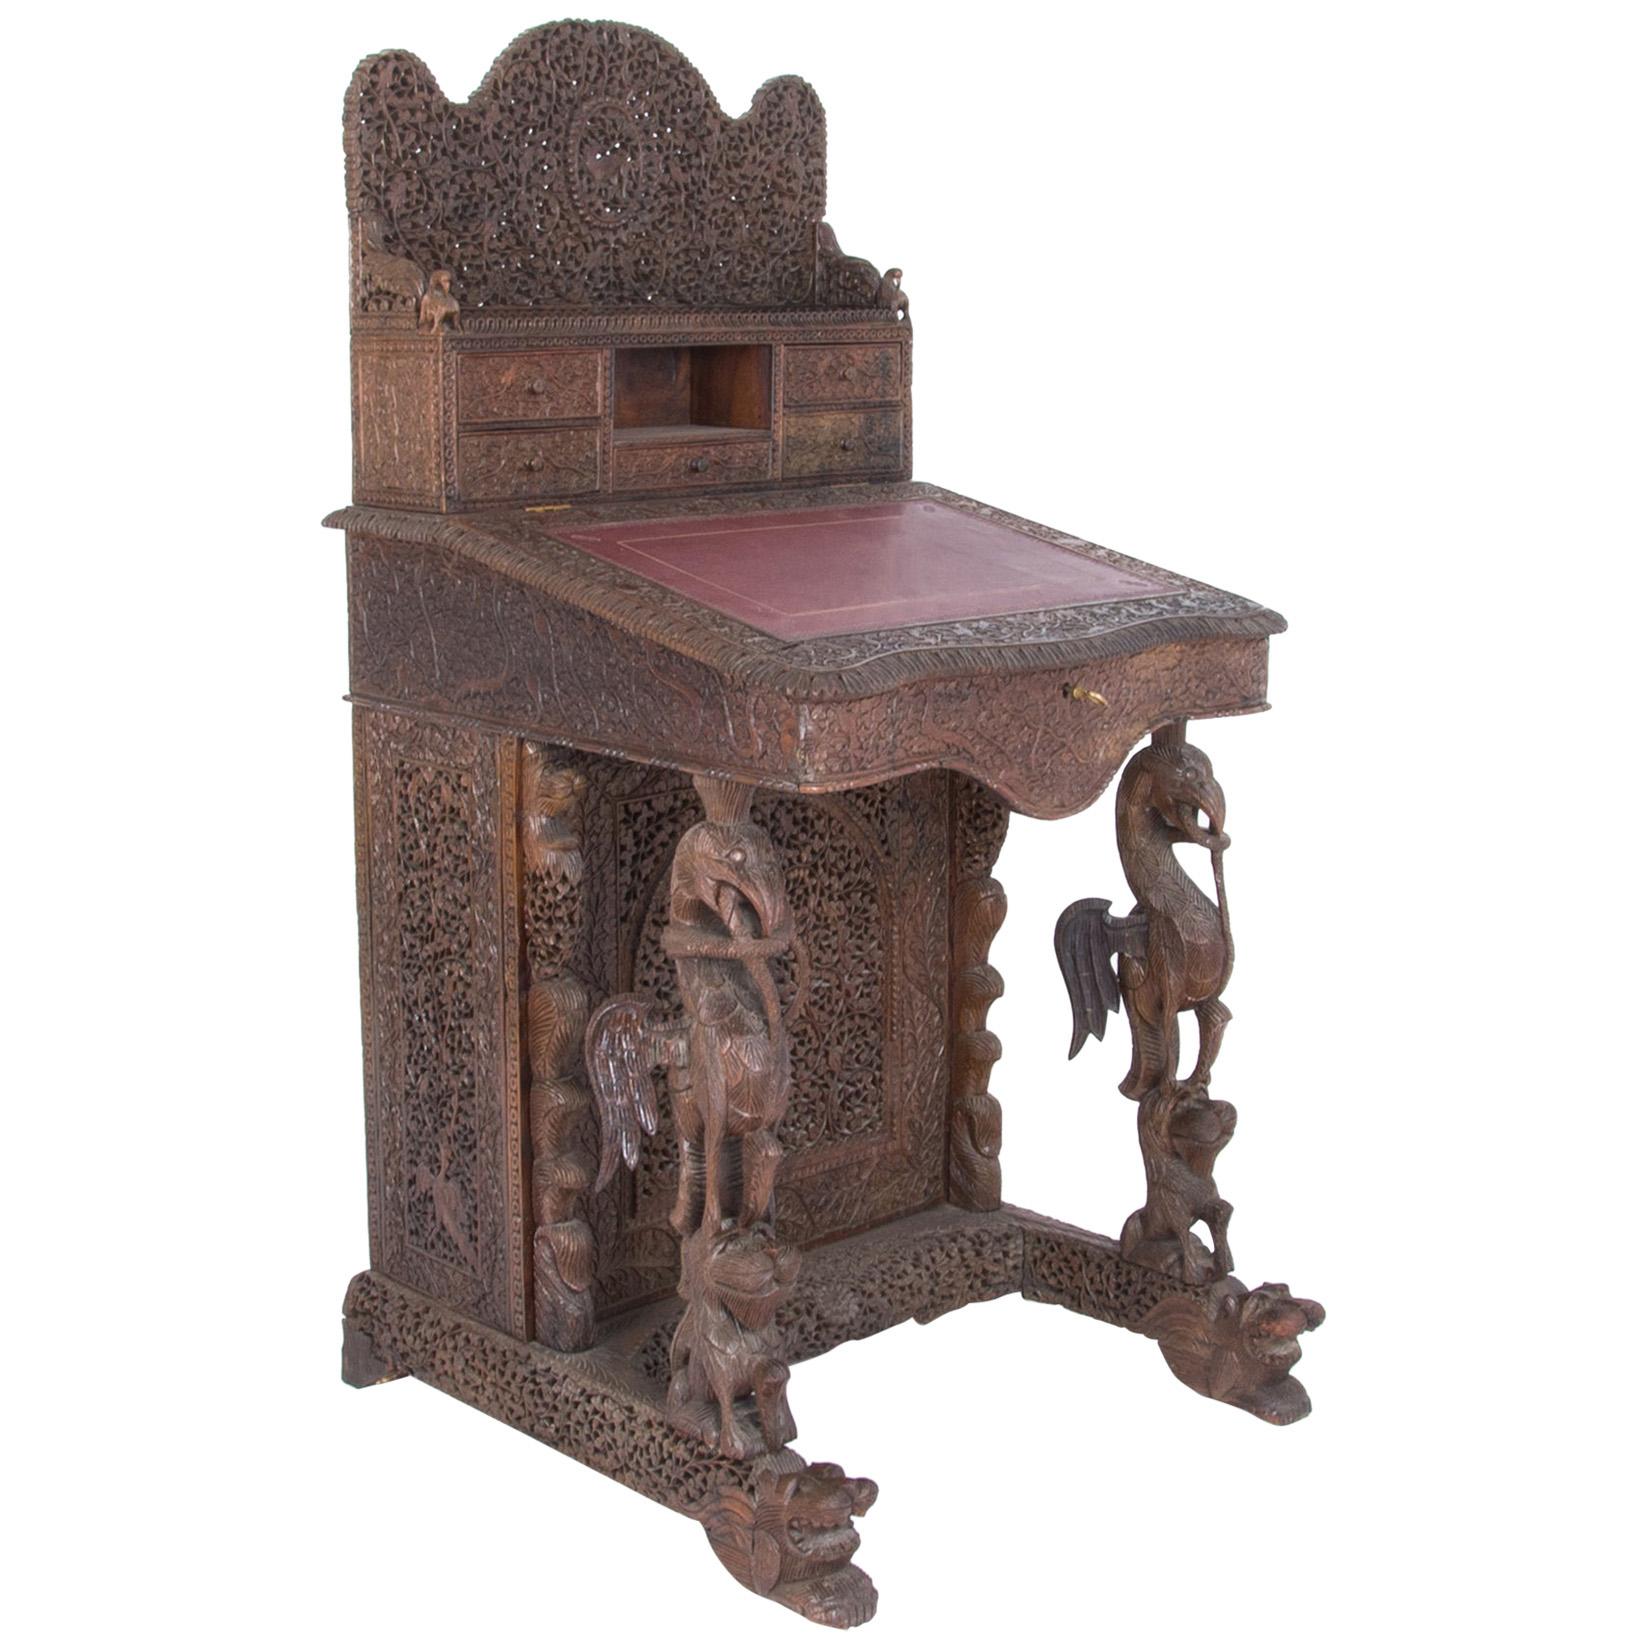 Anglo Indian Ornamental Writing Desk